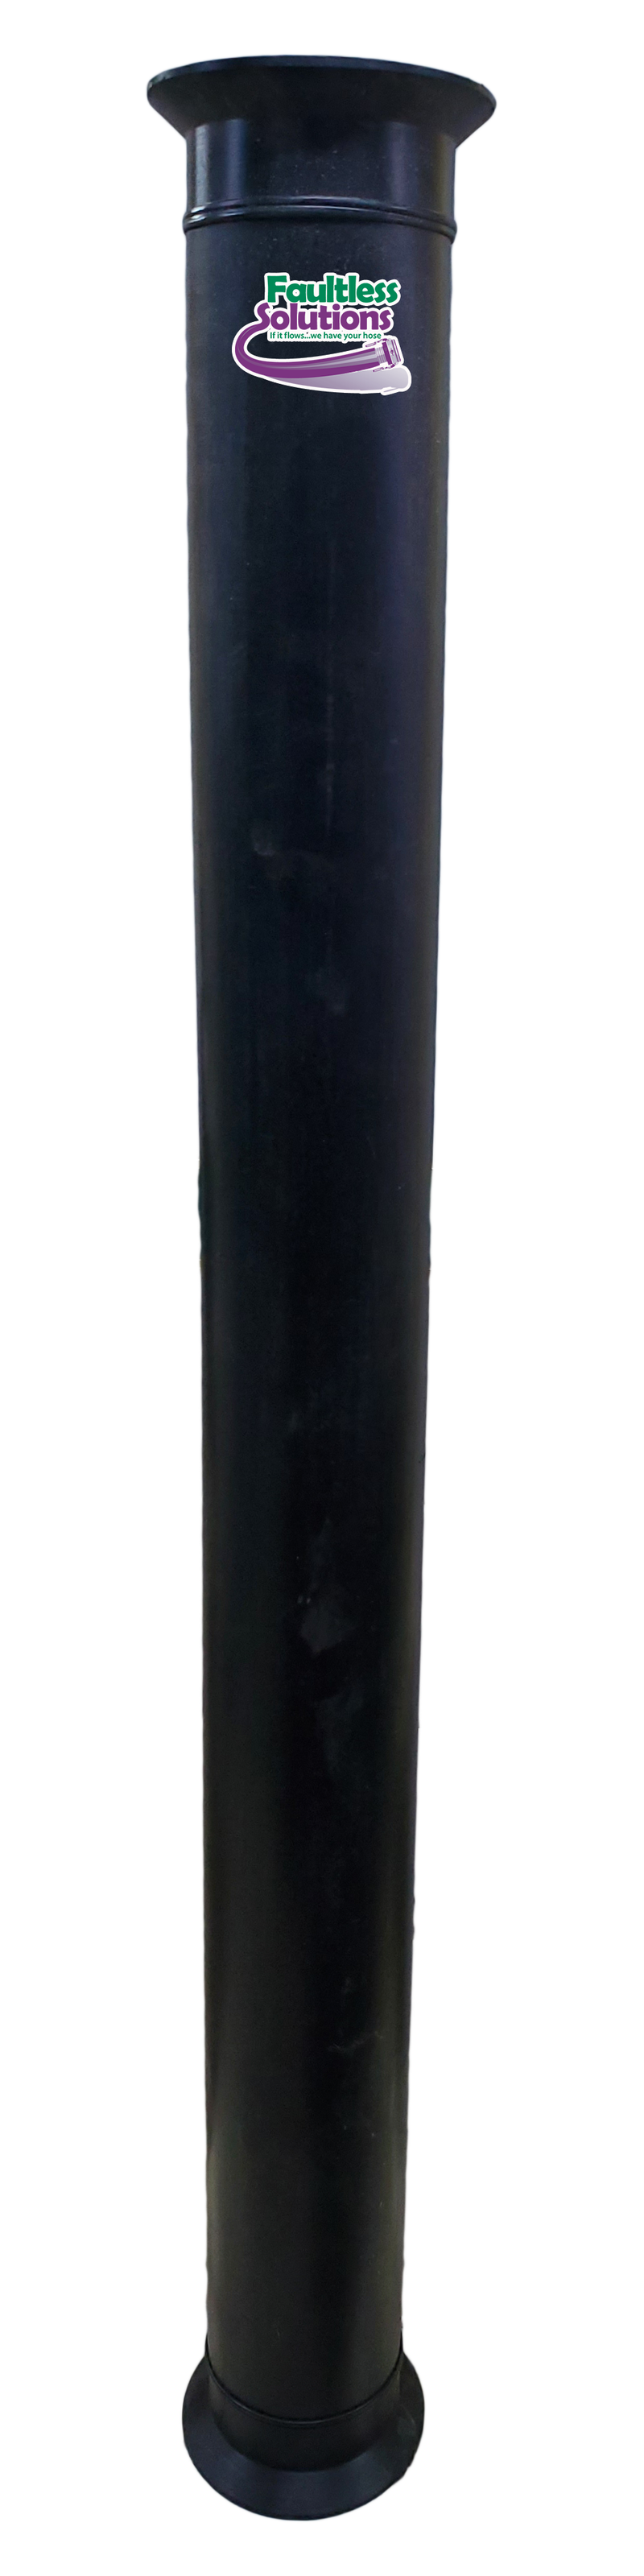 HDPE Polyethylene Plastic Dig Tube/Pipe - Vactor Flange Extension for Hydro-Excavation (Hydrovac) - (Flange x Flange)